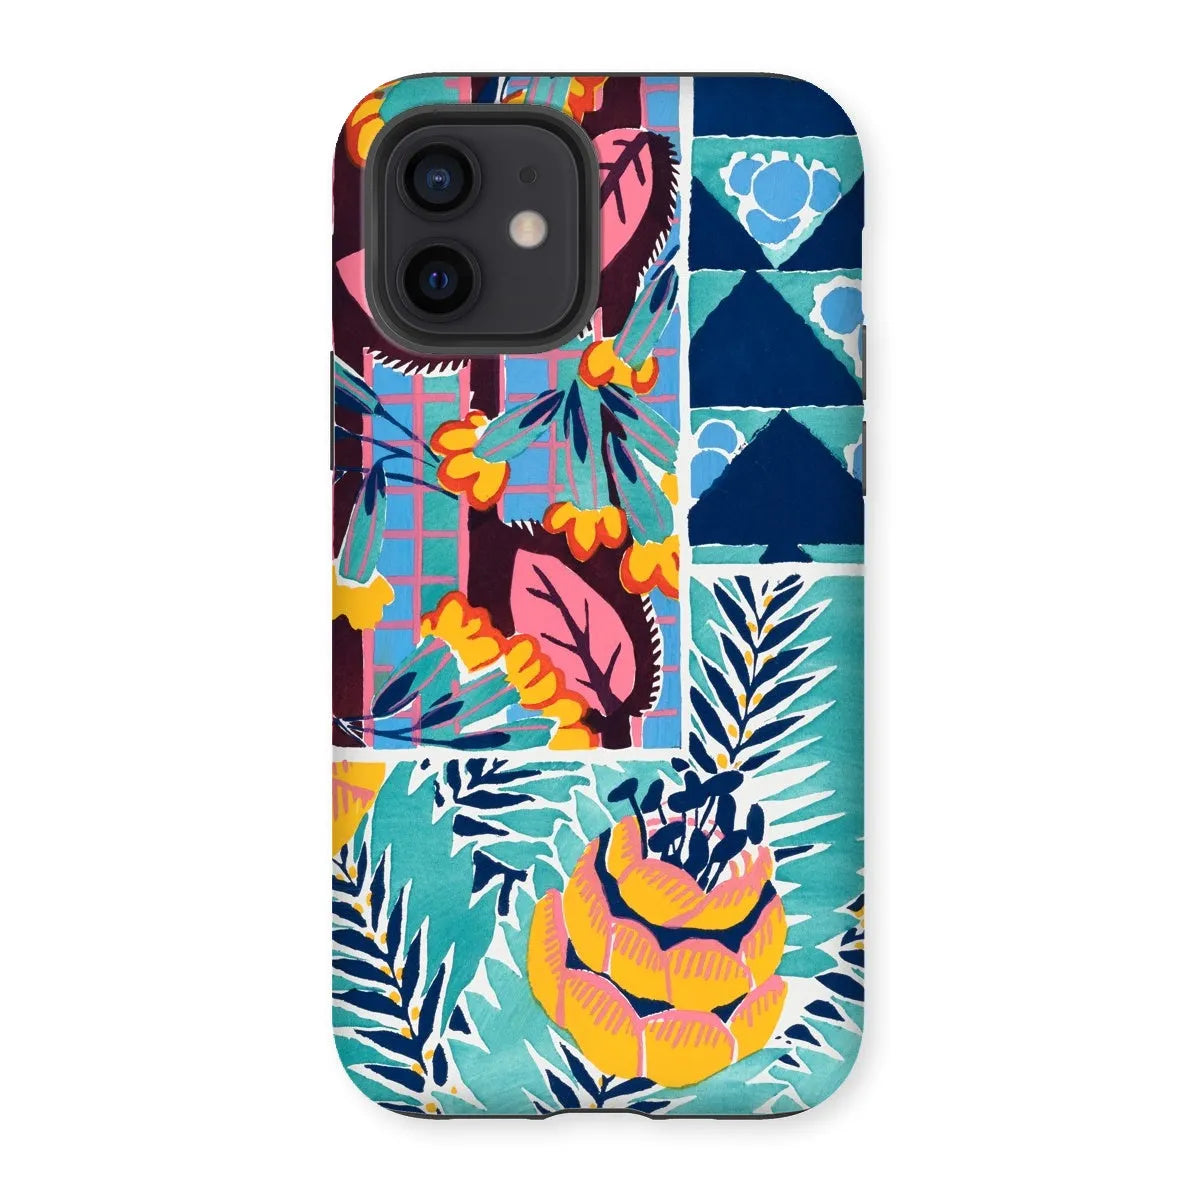 Fabric & Rugs - Pochoir Patterns Phone Case - E. A. Séguy - Iphone 12 / Matte - Mobile Phone Cases - Aesthetic Art